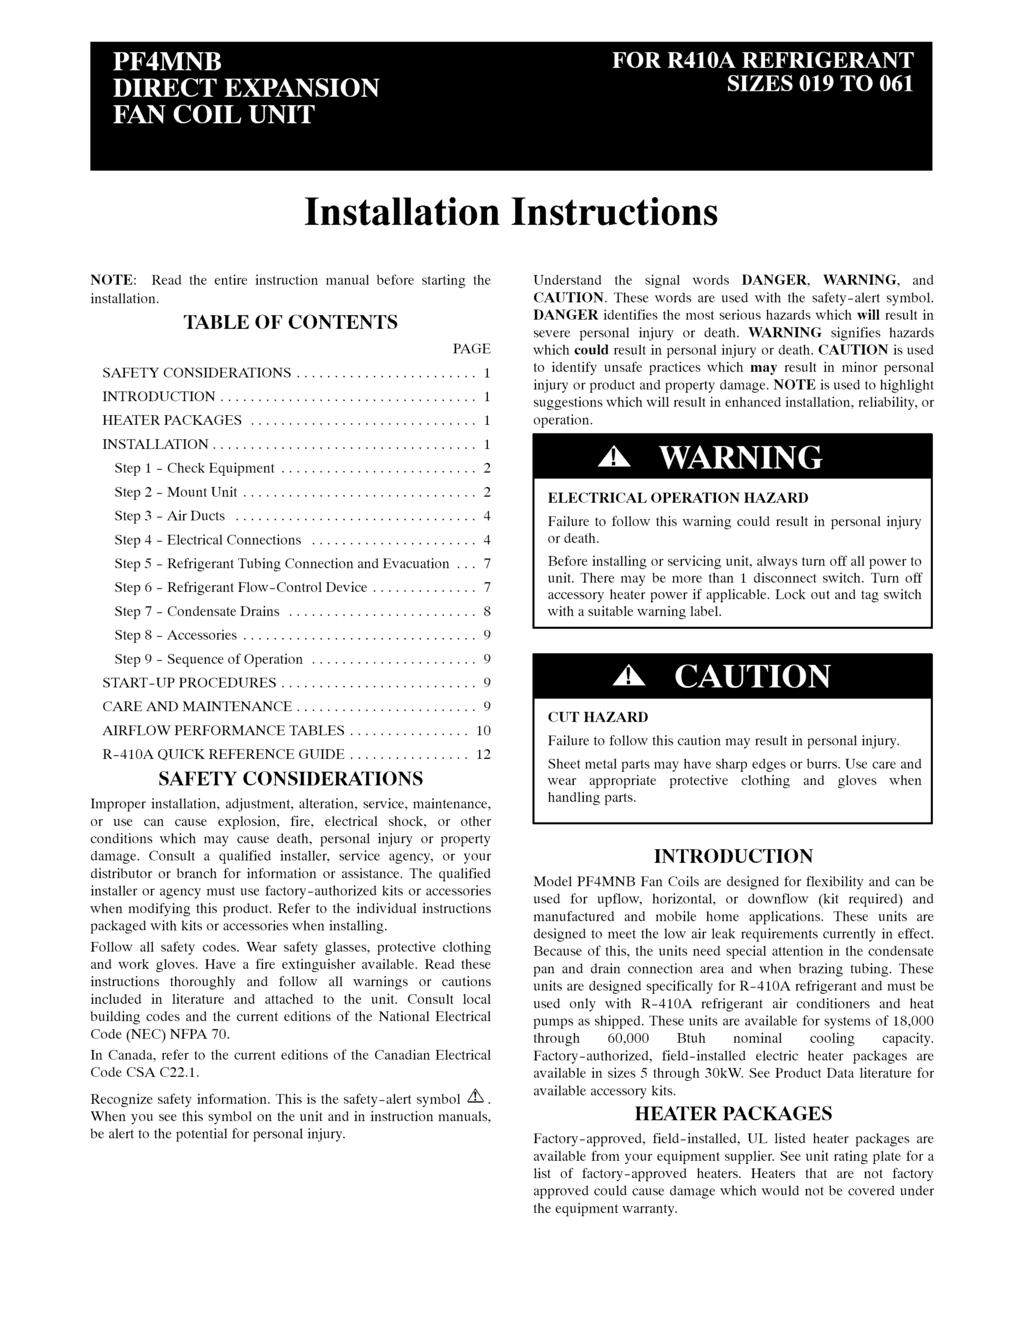 Installation Instructions NOTE: Read the entire instruction manual before starting the installation. TABLE OF CONTENTS PAGE SAFETY CONSIDERATIONS... 1 INTRODUCTION... 1 HEATER PACKAGES.